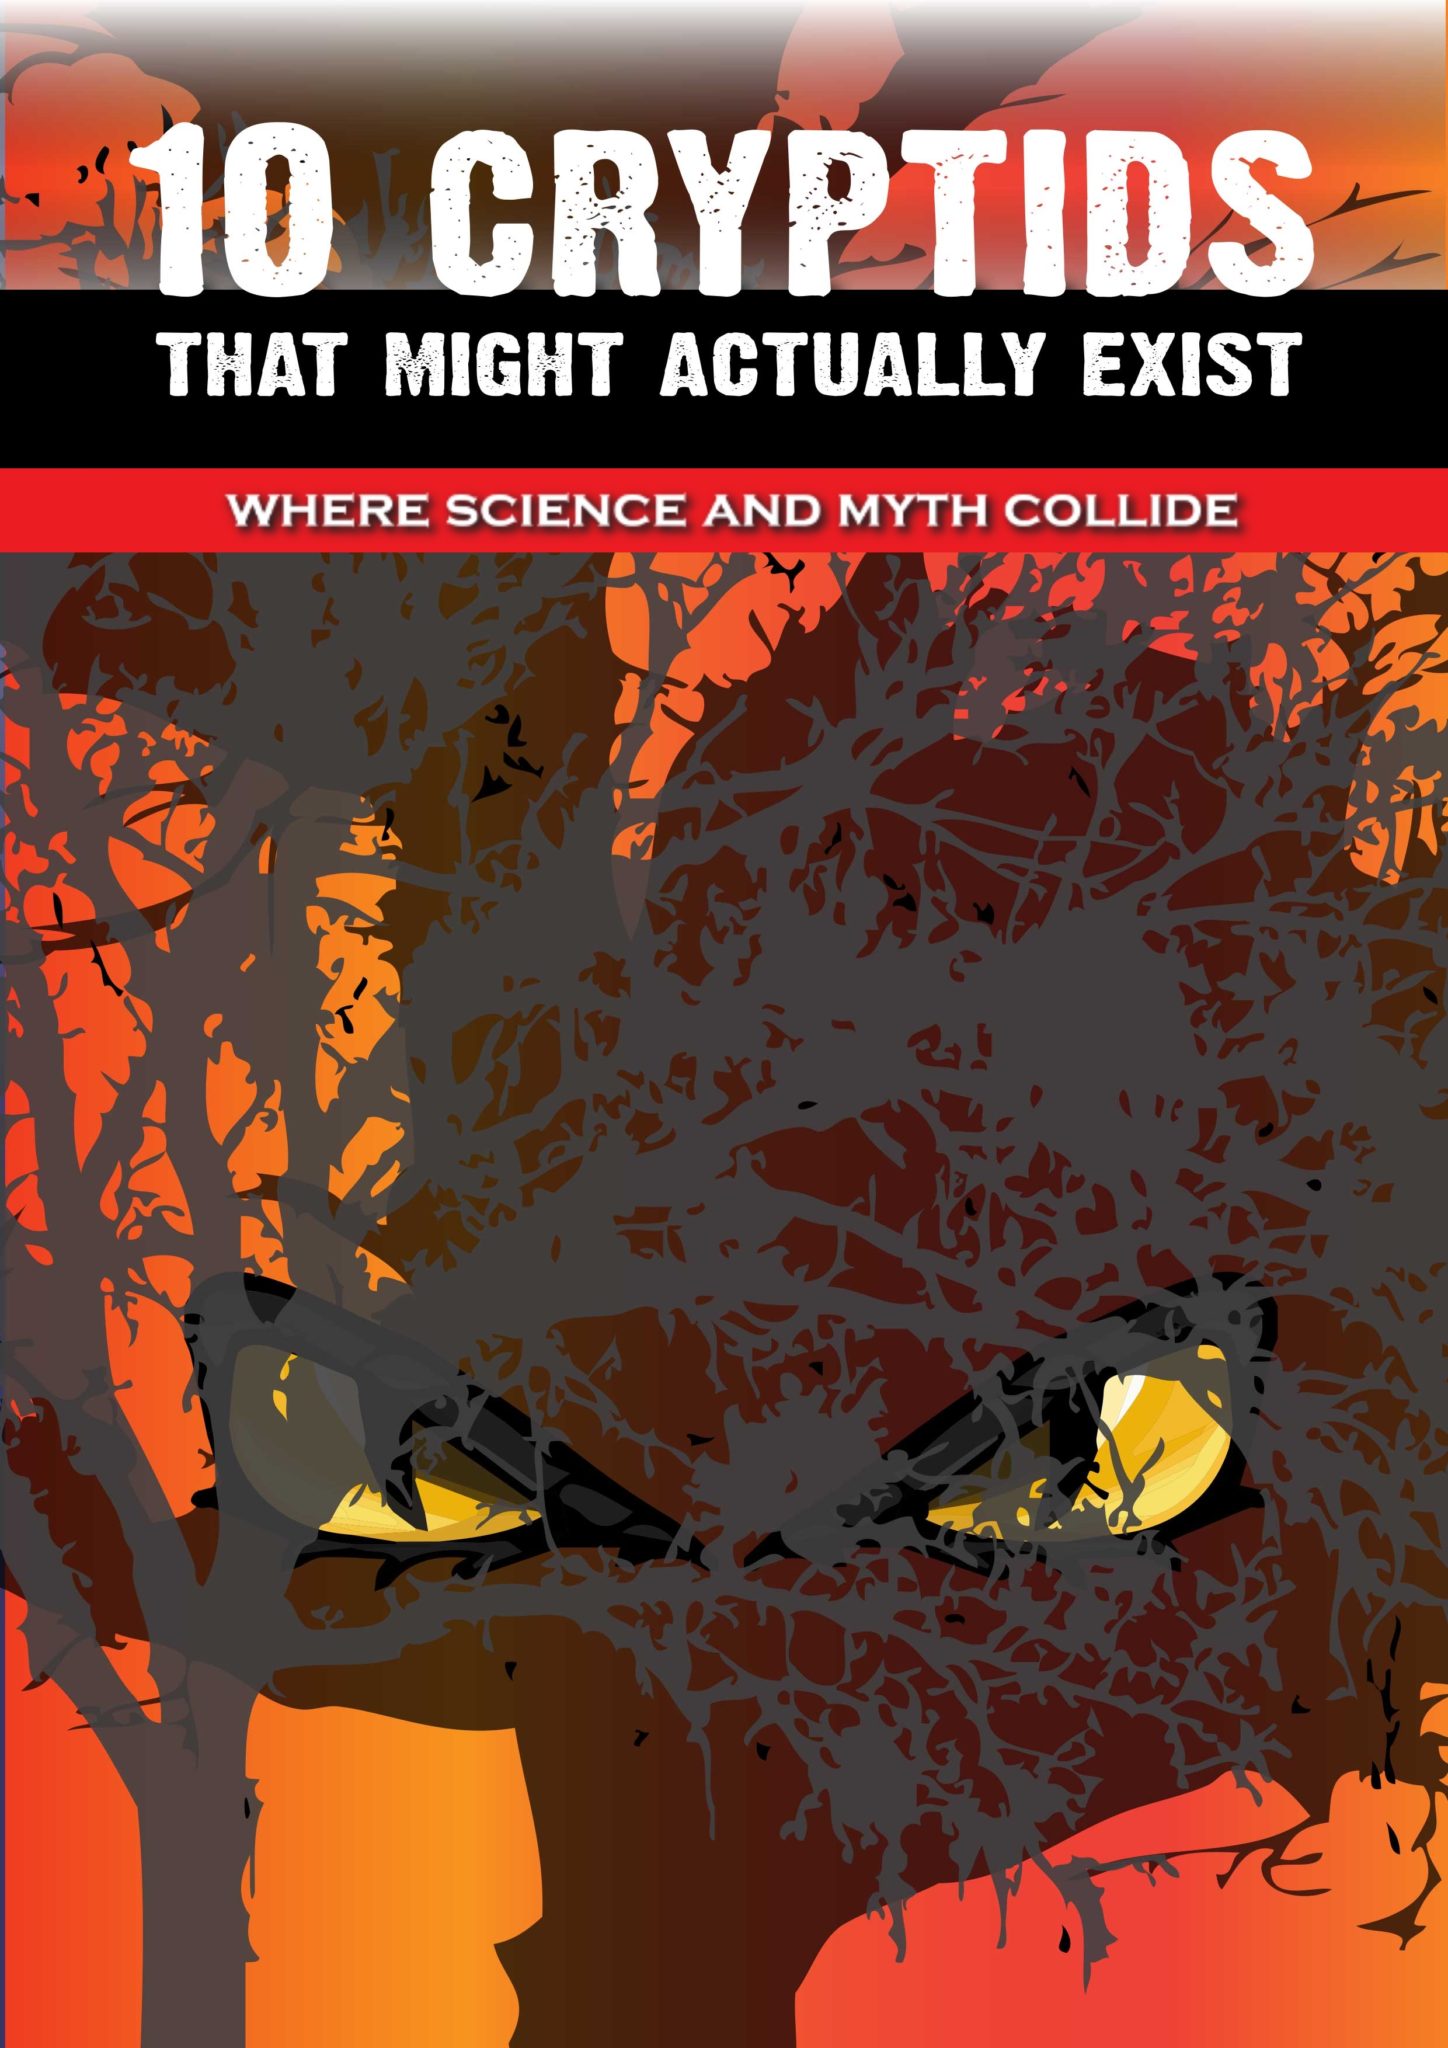 FREE: 10 Cryptids That Might Really Exist: Where Science And Myth Collide by Michael Arangua